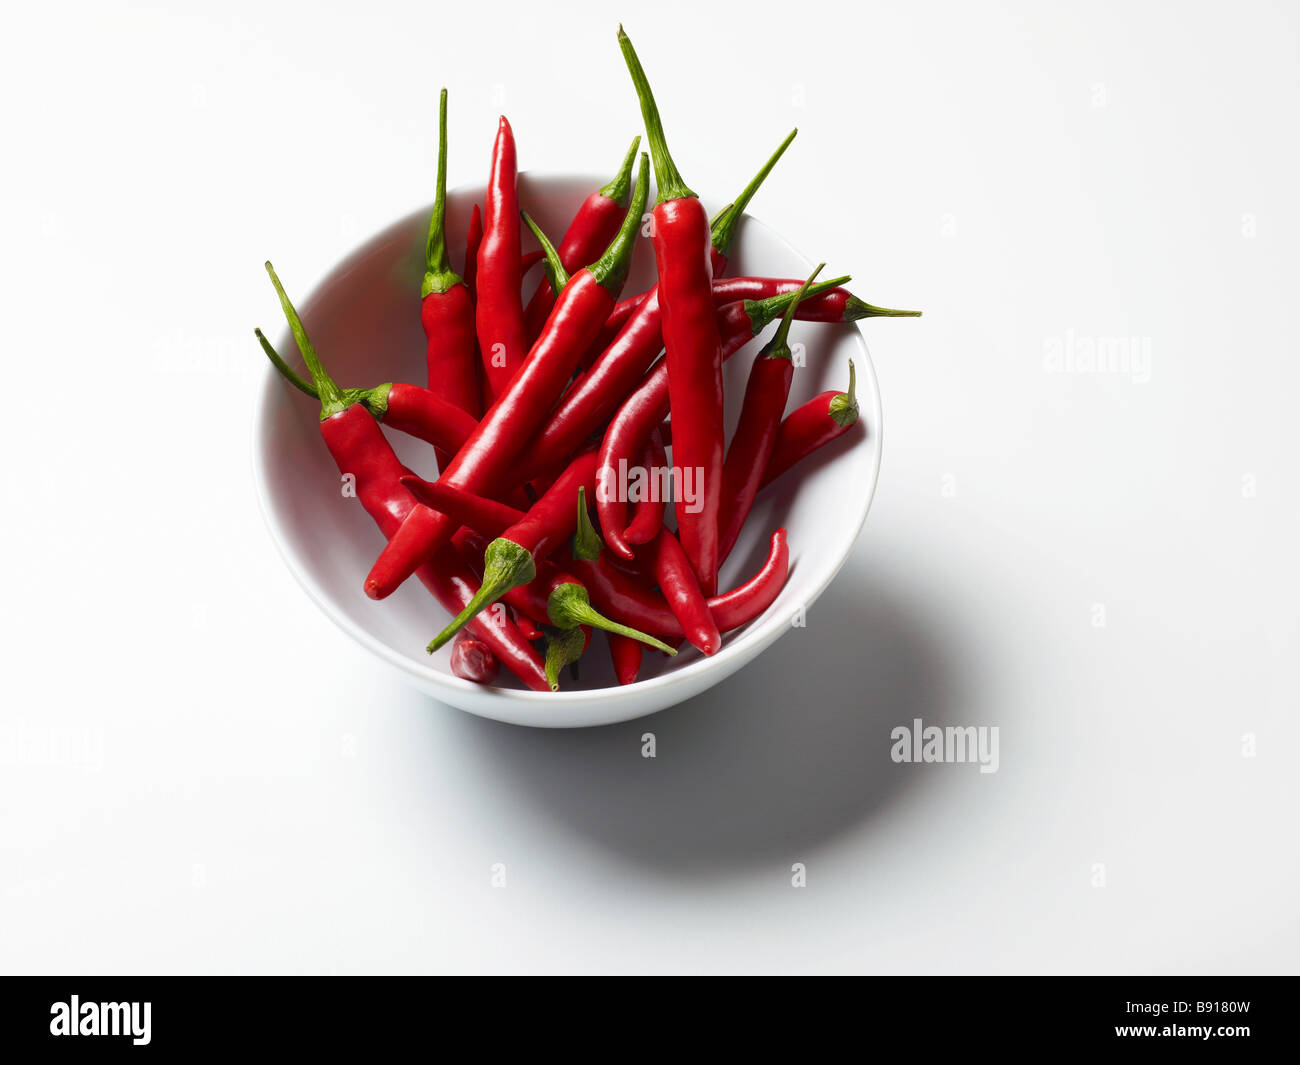 Bowl of fresh red chillies Stock Photo